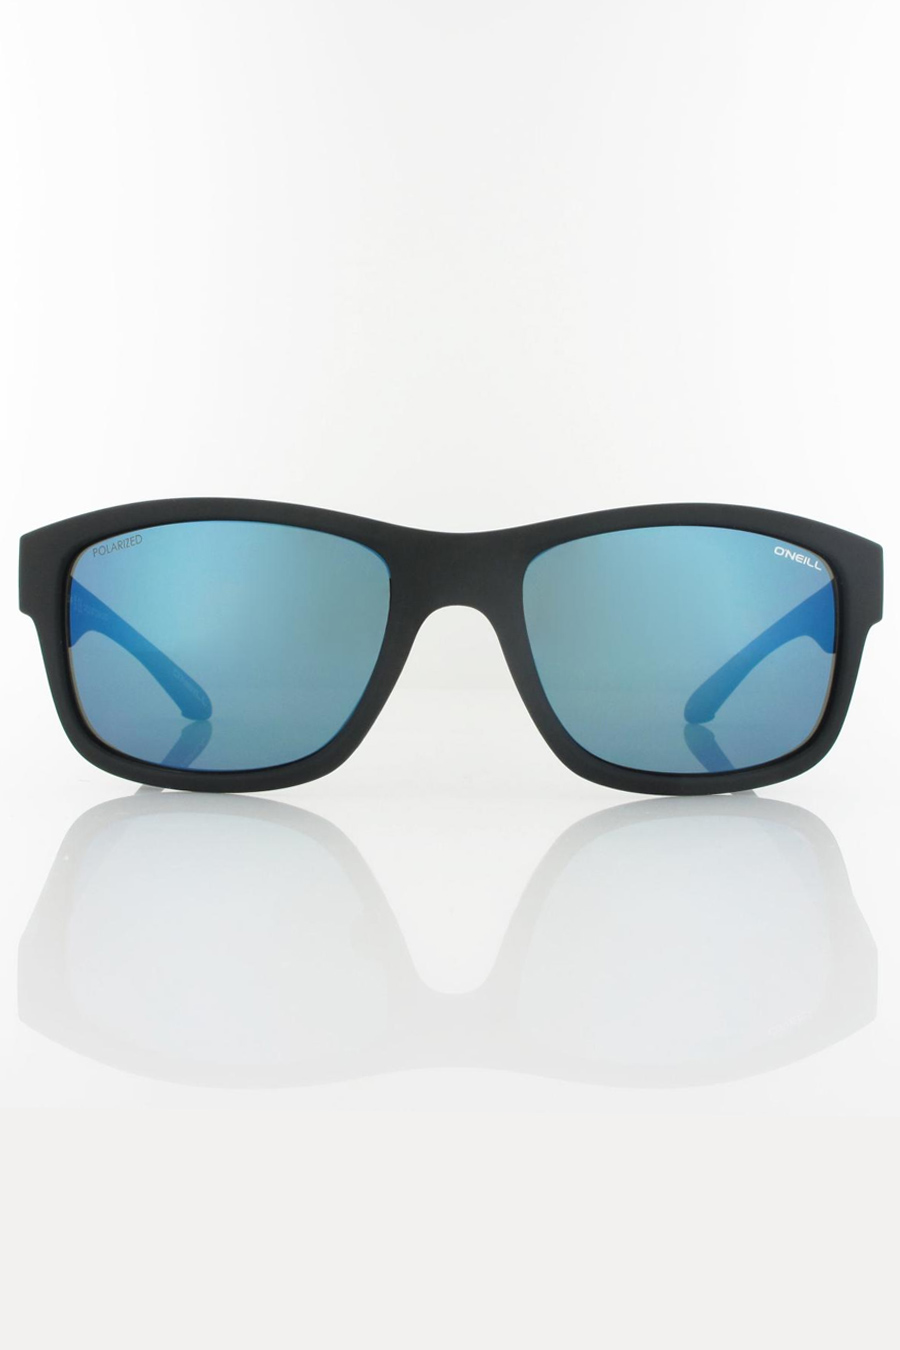 Saulesbrilles ONEILL ONS-9029-20-104P